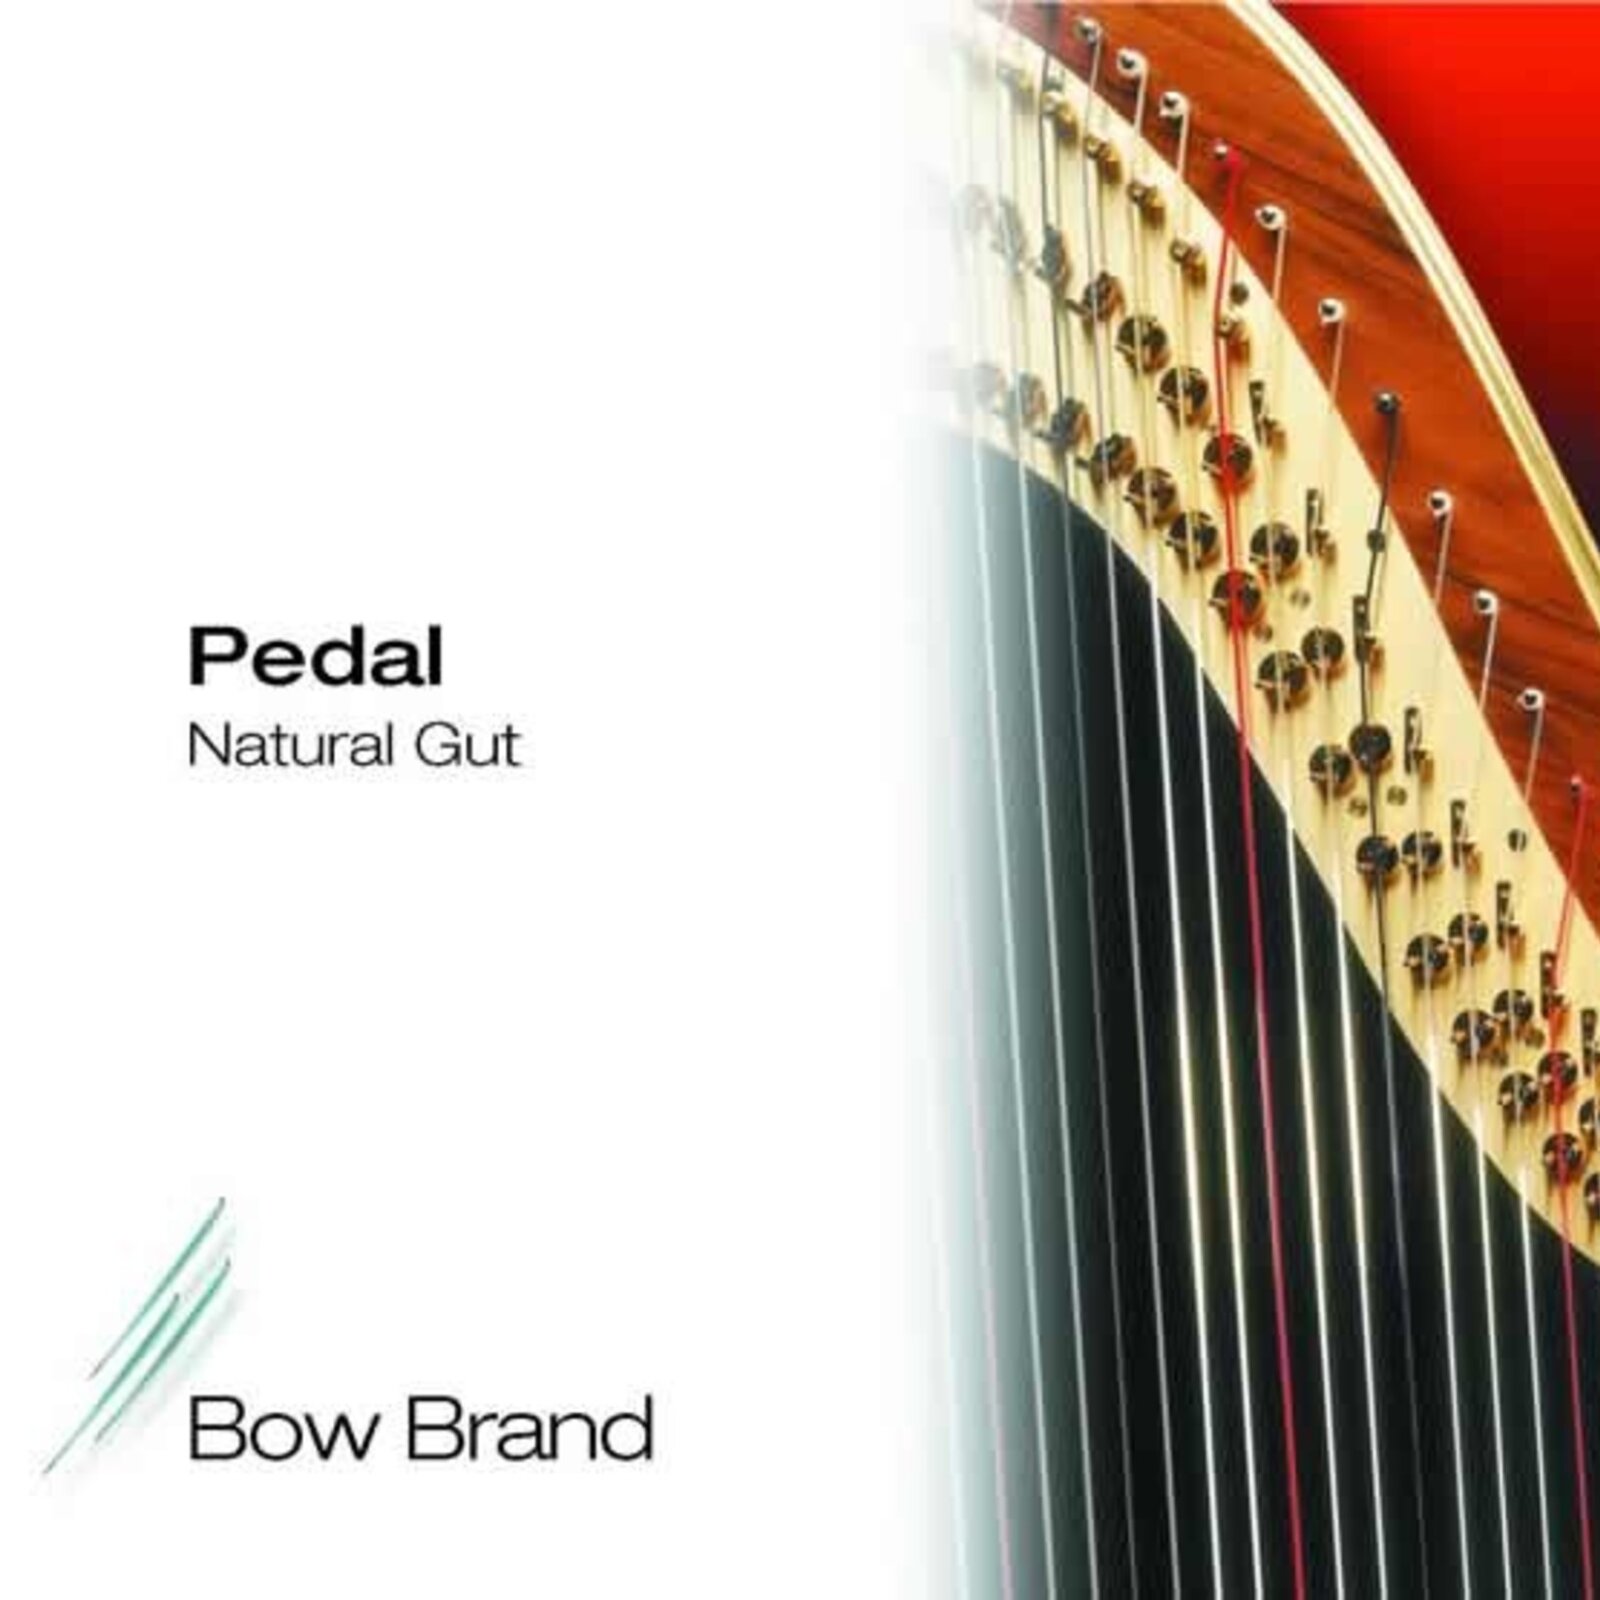 Bow Brand N 14 FA 2nd octave in gut for pedal harp : photo 1